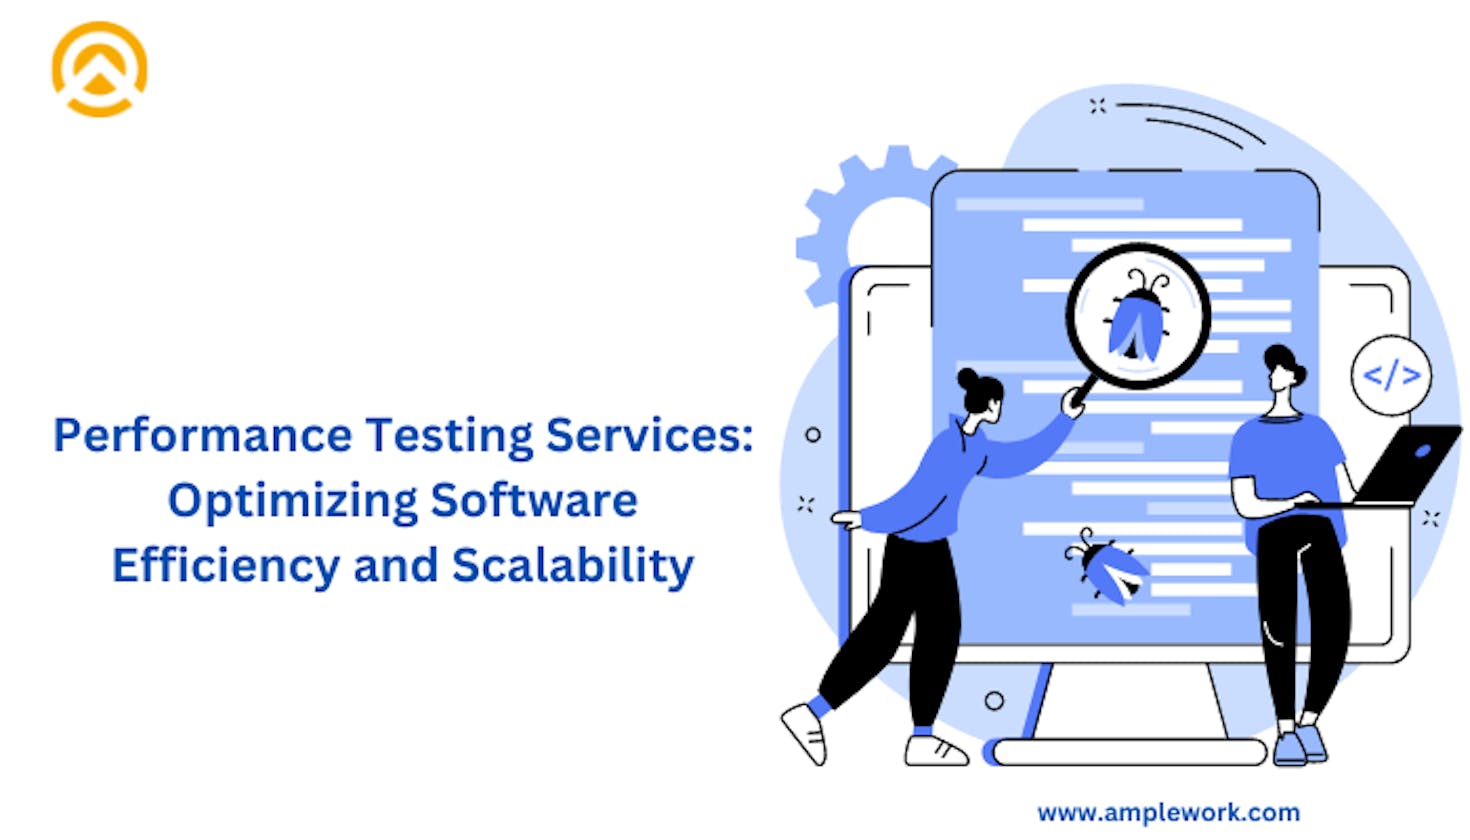 Performance Testing Services: Optimizing Software Efficiency and Scalability